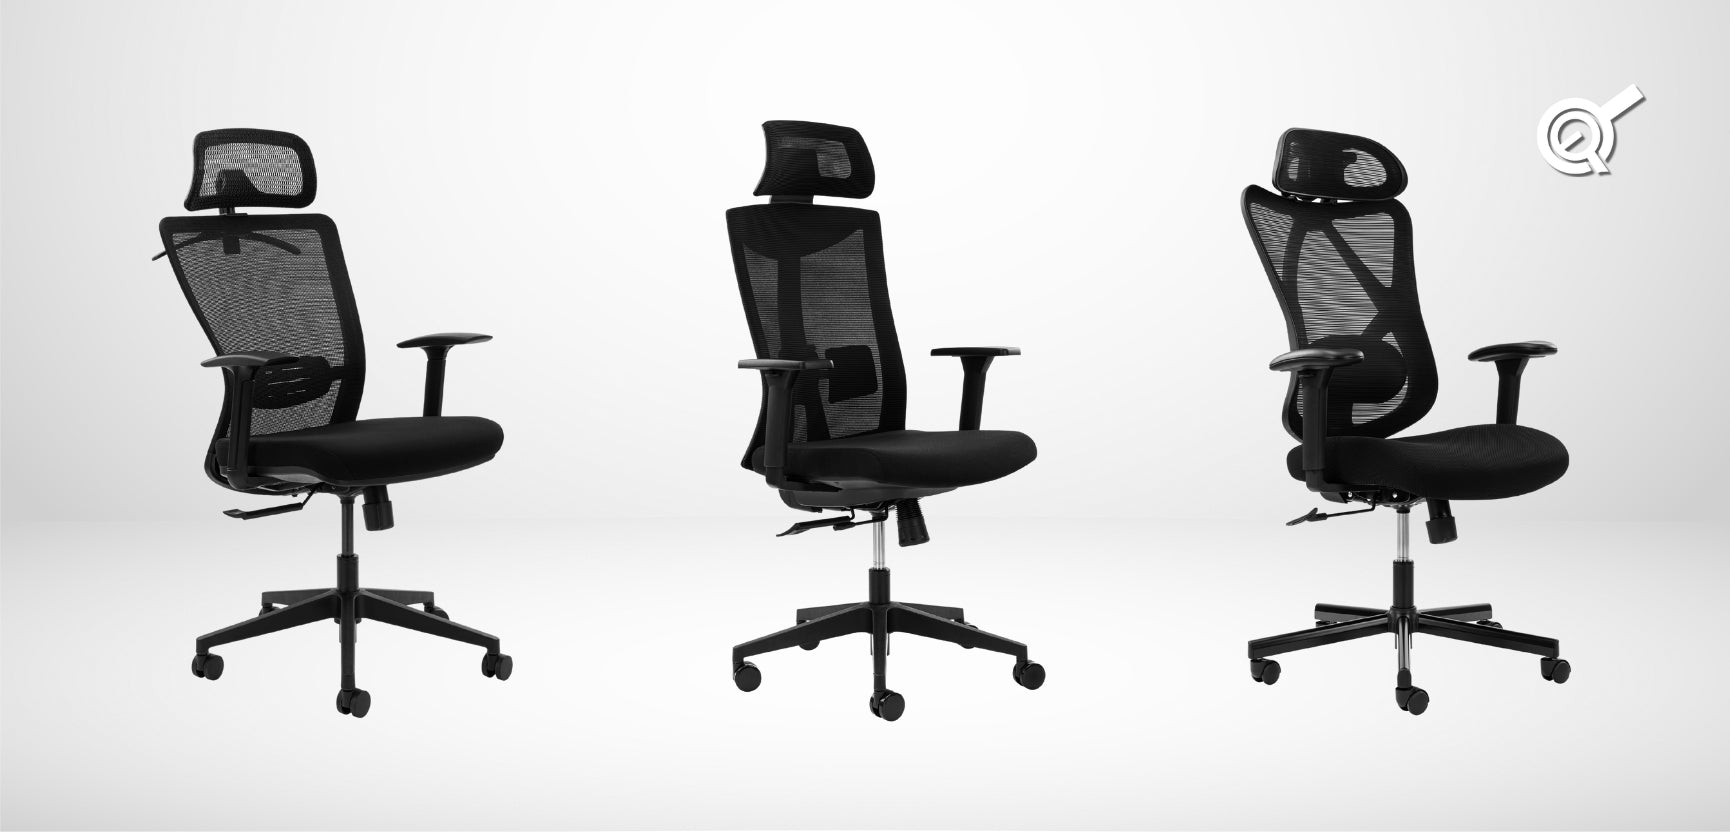  Glyders - Our Ergonomic Chairs